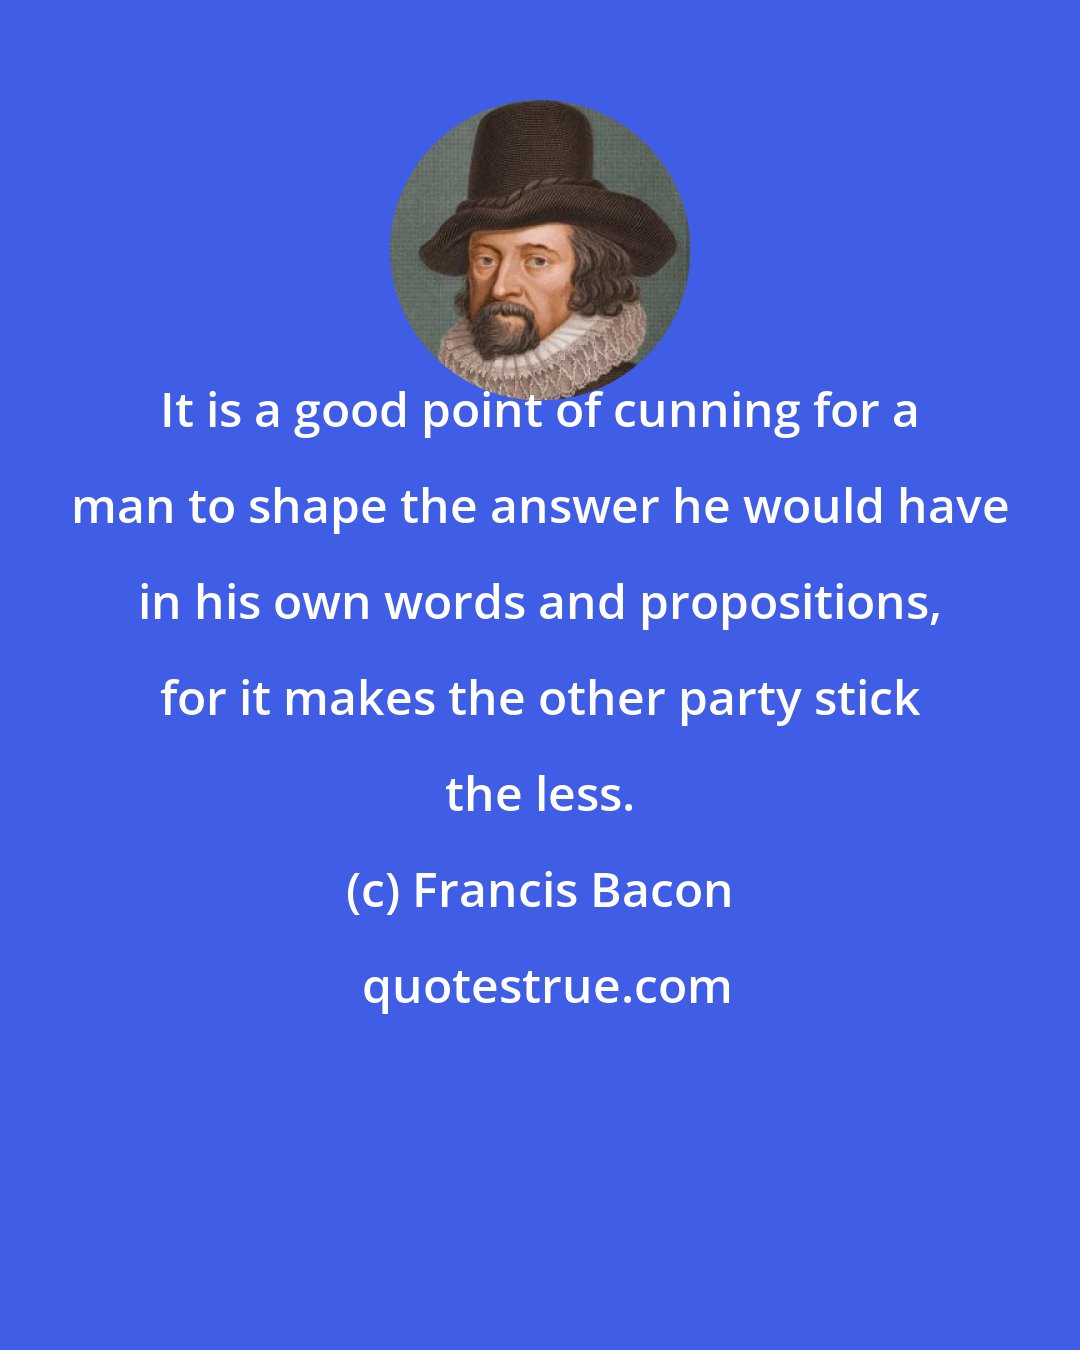 Francis Bacon: It is a good point of cunning for a man to shape the answer he would have in his own words and propositions, for it makes the other party stick the less.